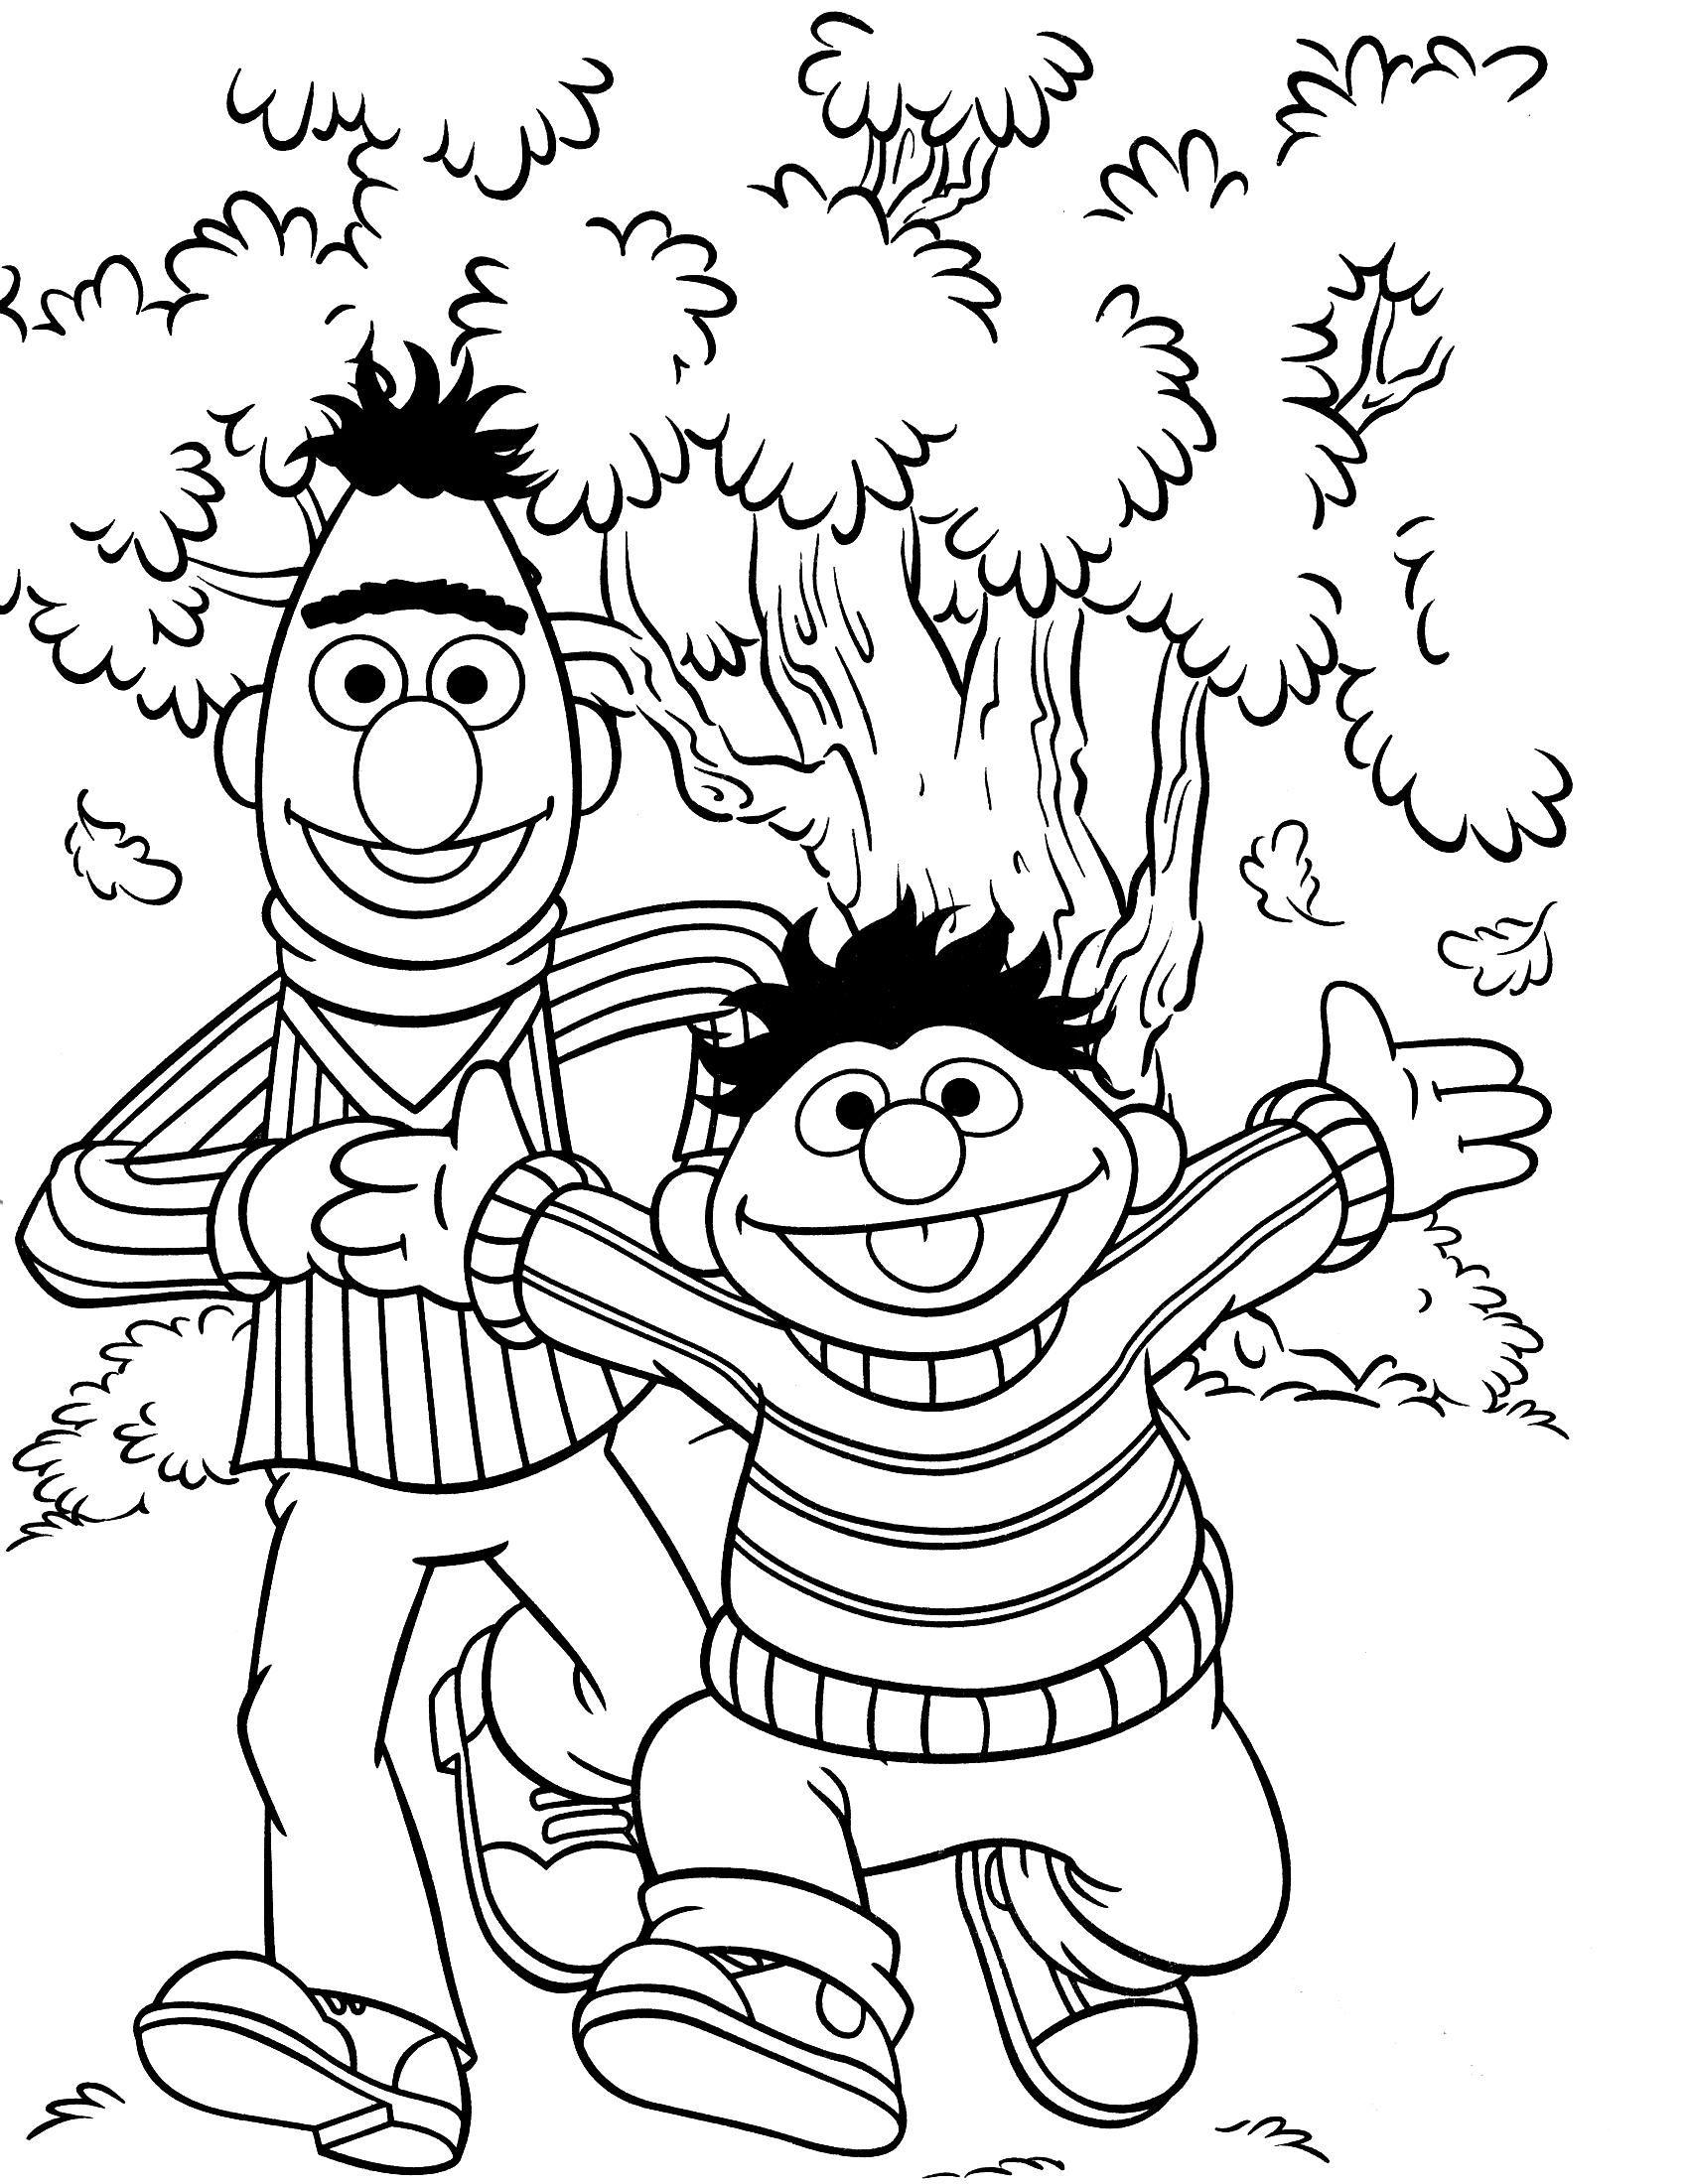 Sesame Street Christmas Coloring Pages at GetDrawings | Free download